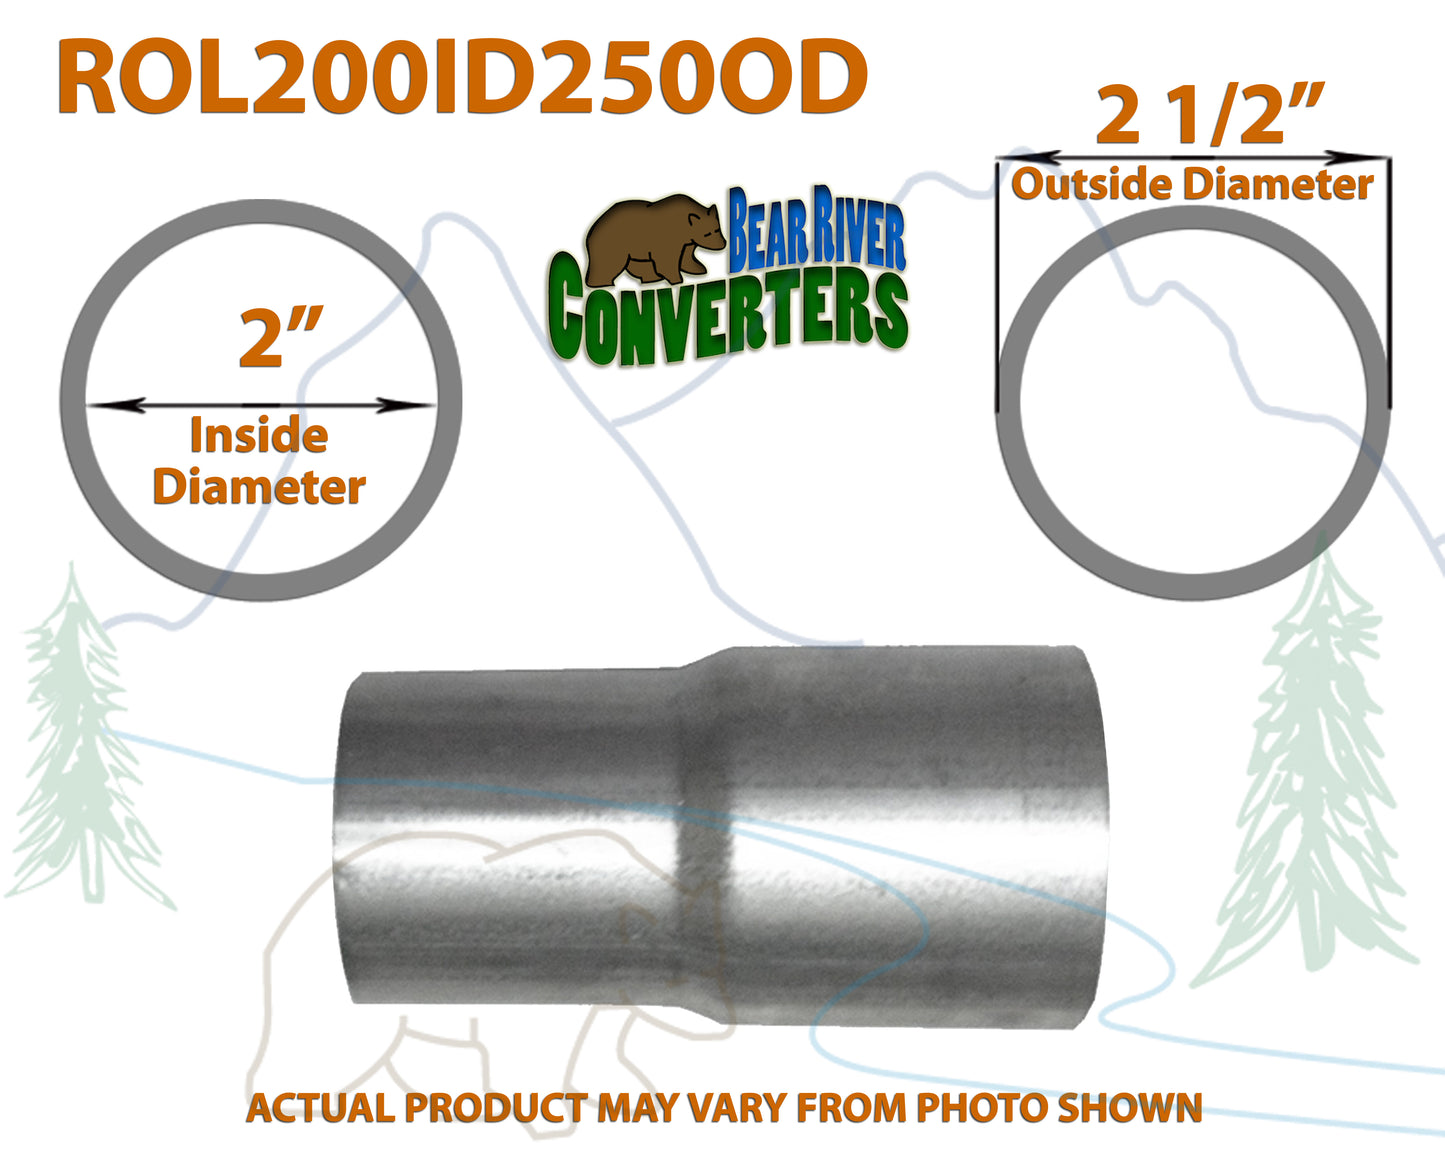 ROL200ID250OD 617566 Exhaust Pipe Adapter Reducer - Connect 2" OD Pipe to 2.5" ( 2 1/2 ) ID Pipe